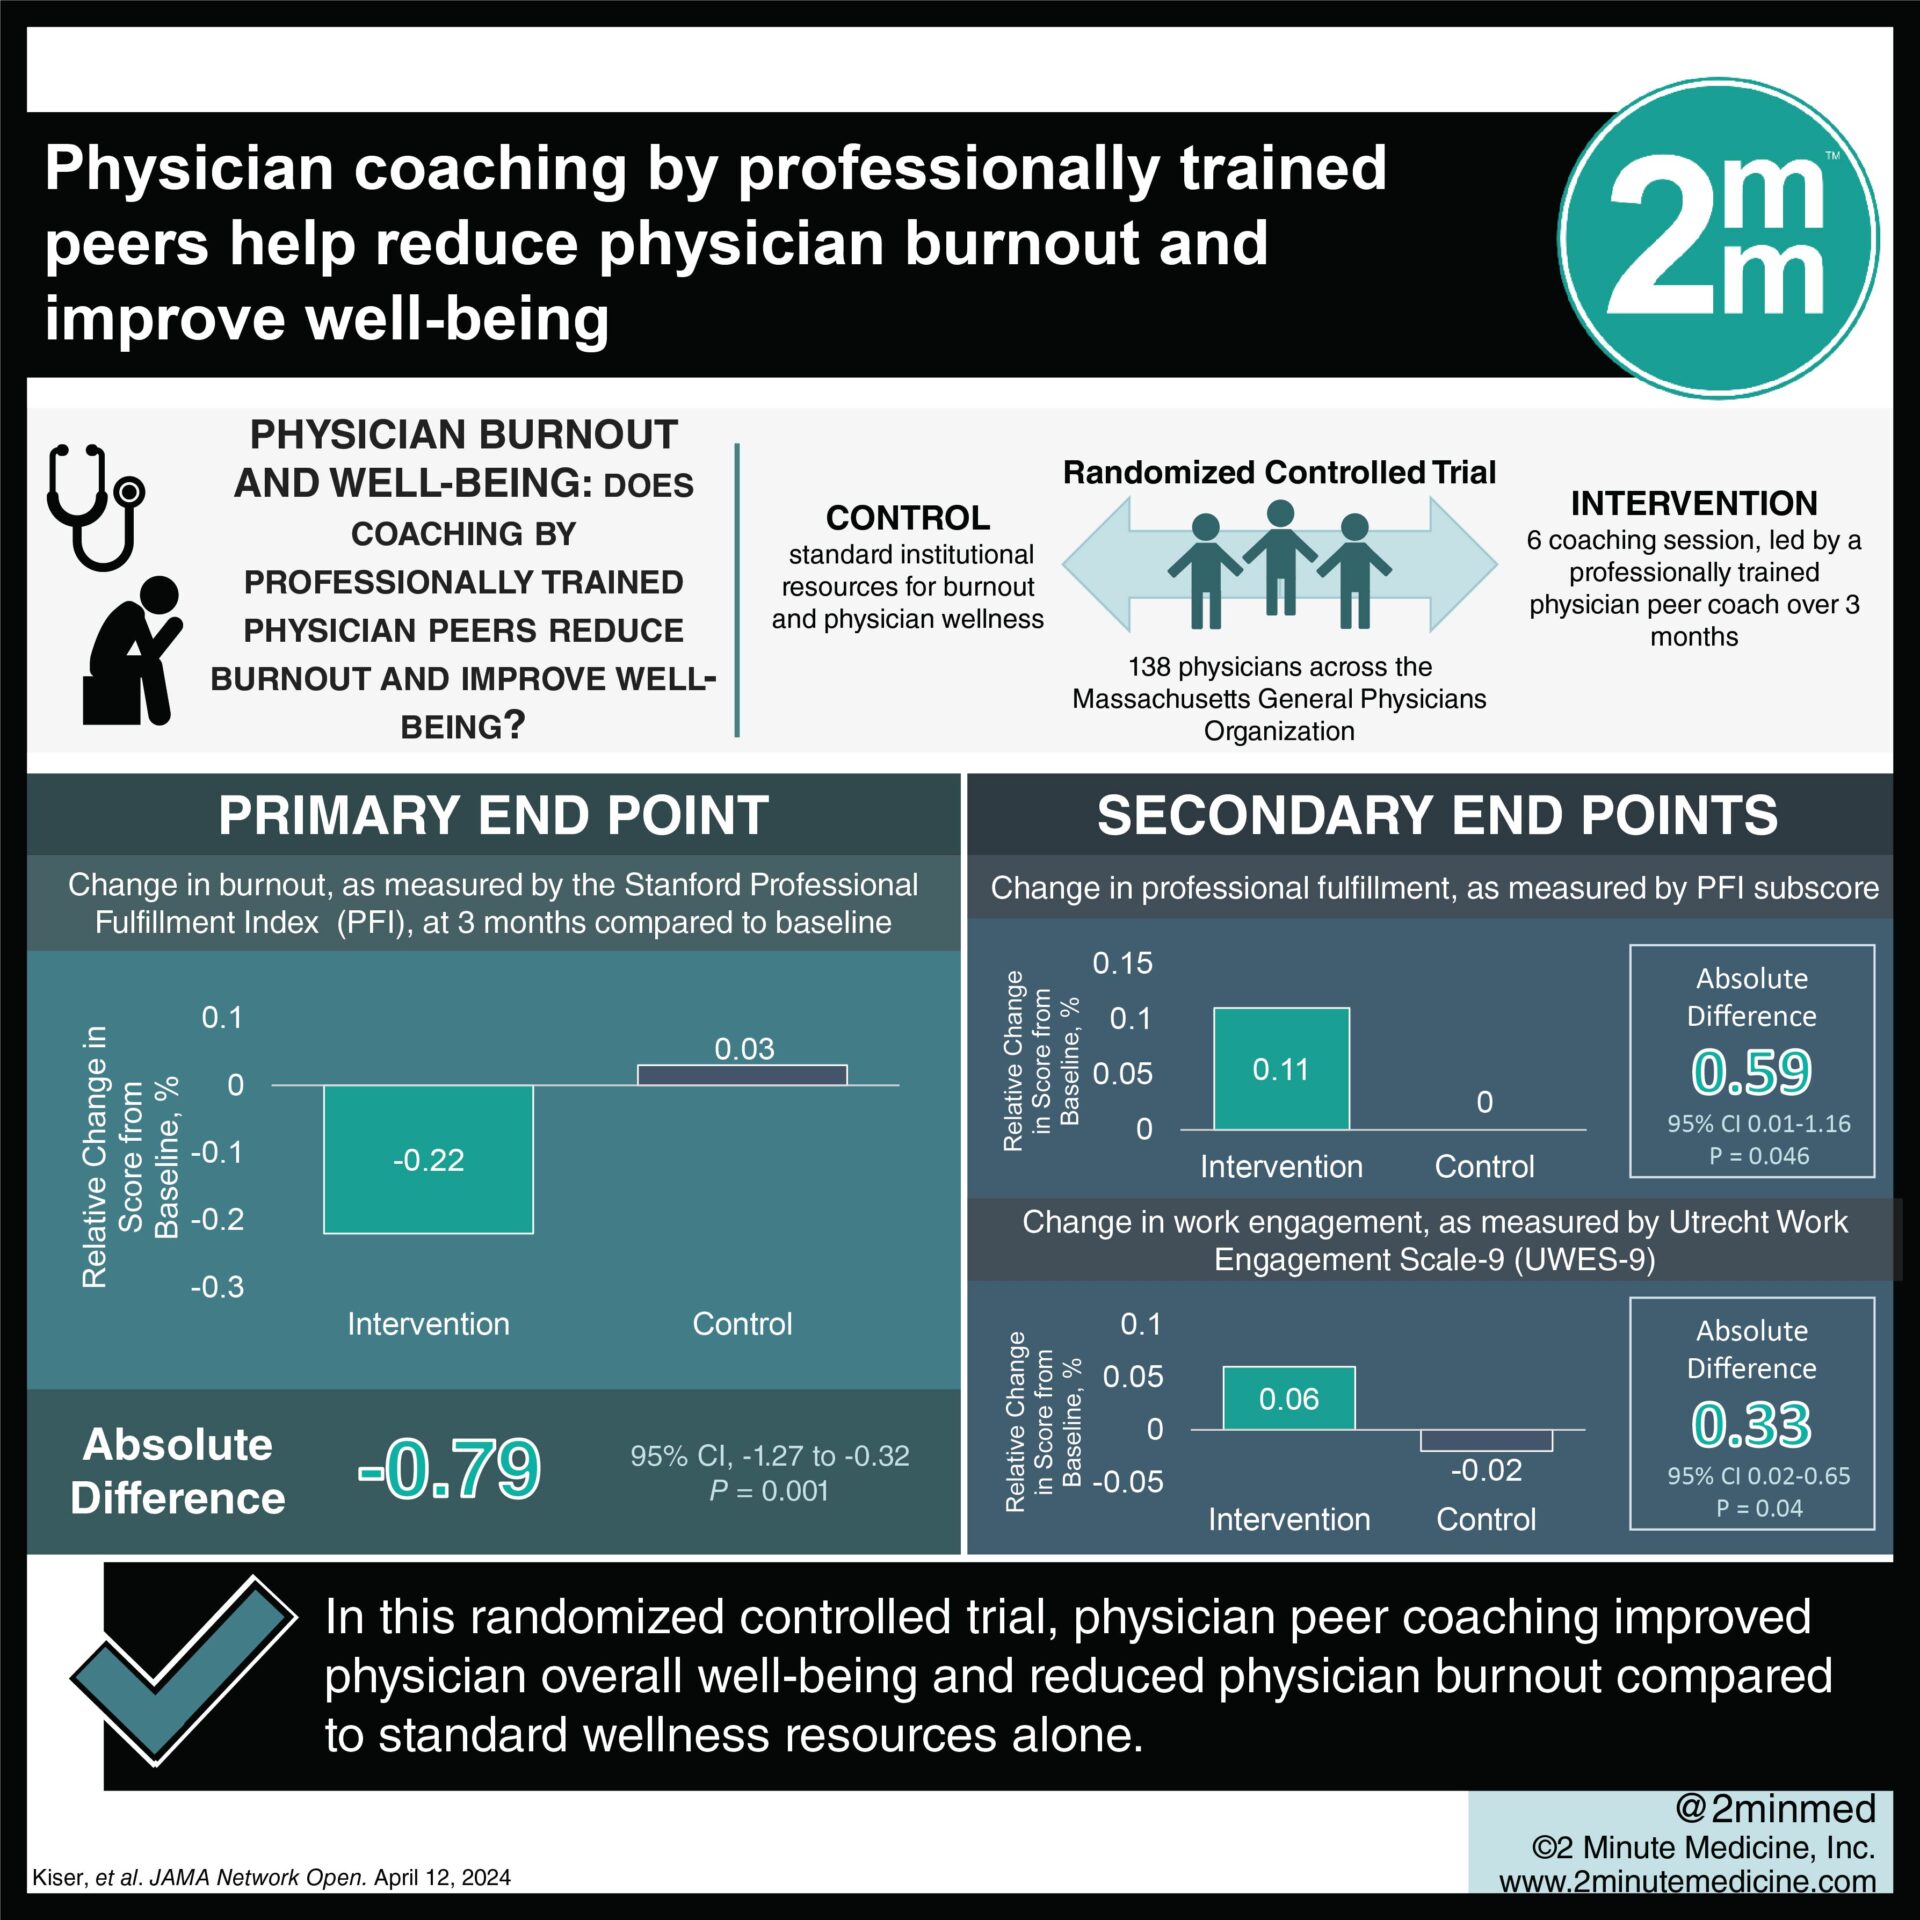 #VisualAbstract: Physician coaching by professionally trained peers help reduce physician burnout and improve well-being